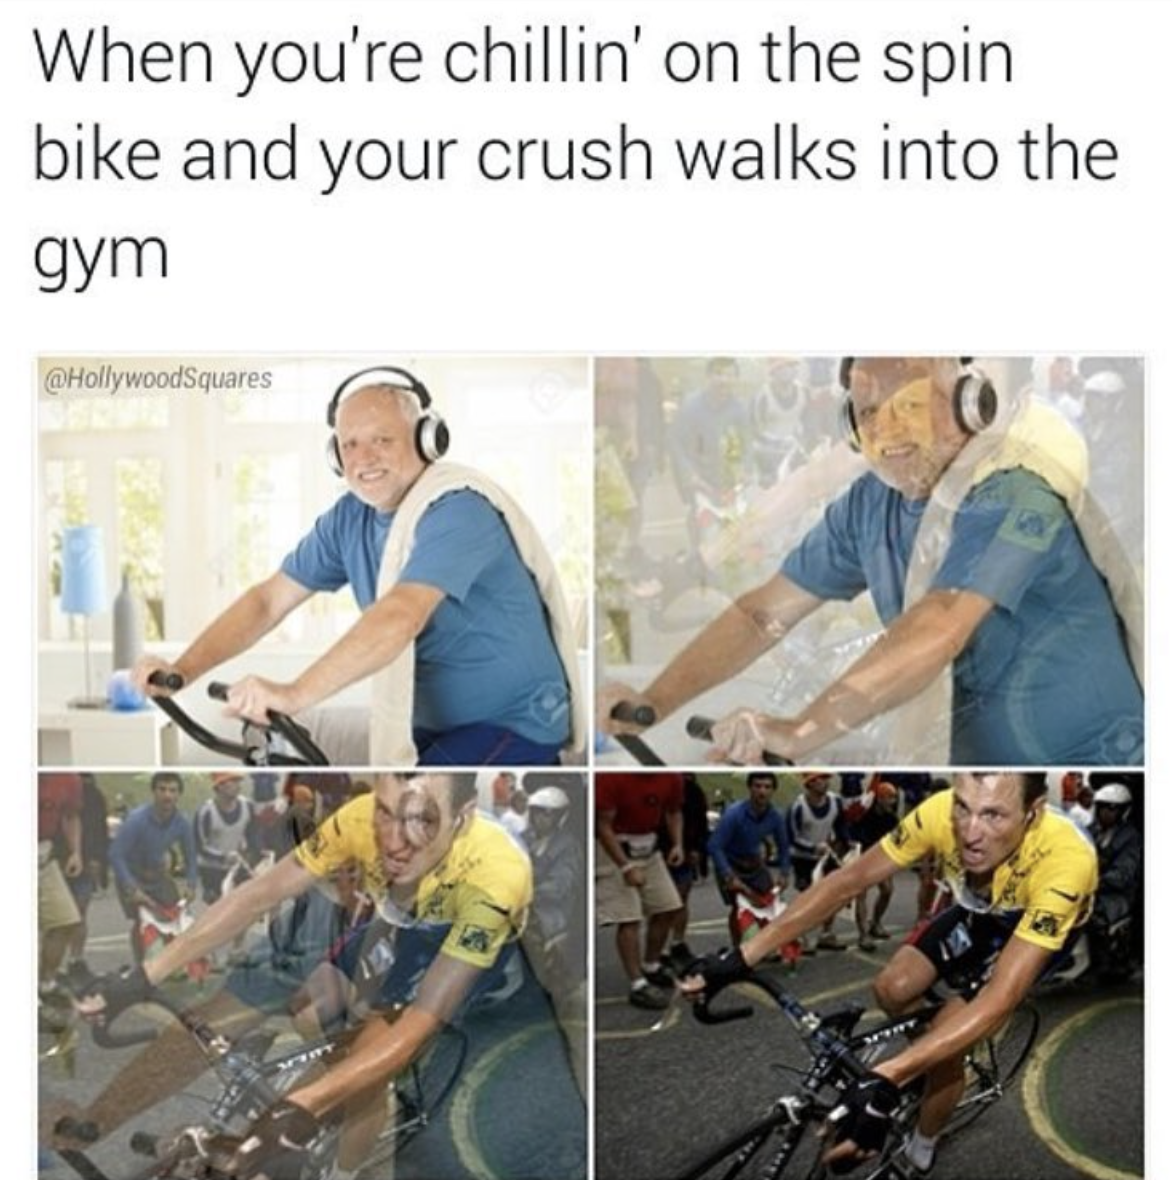 Hide The hurt Harold chilling on a treadmill VS how you act when your crush walks in Lance Armstrong gunning it on his bike.